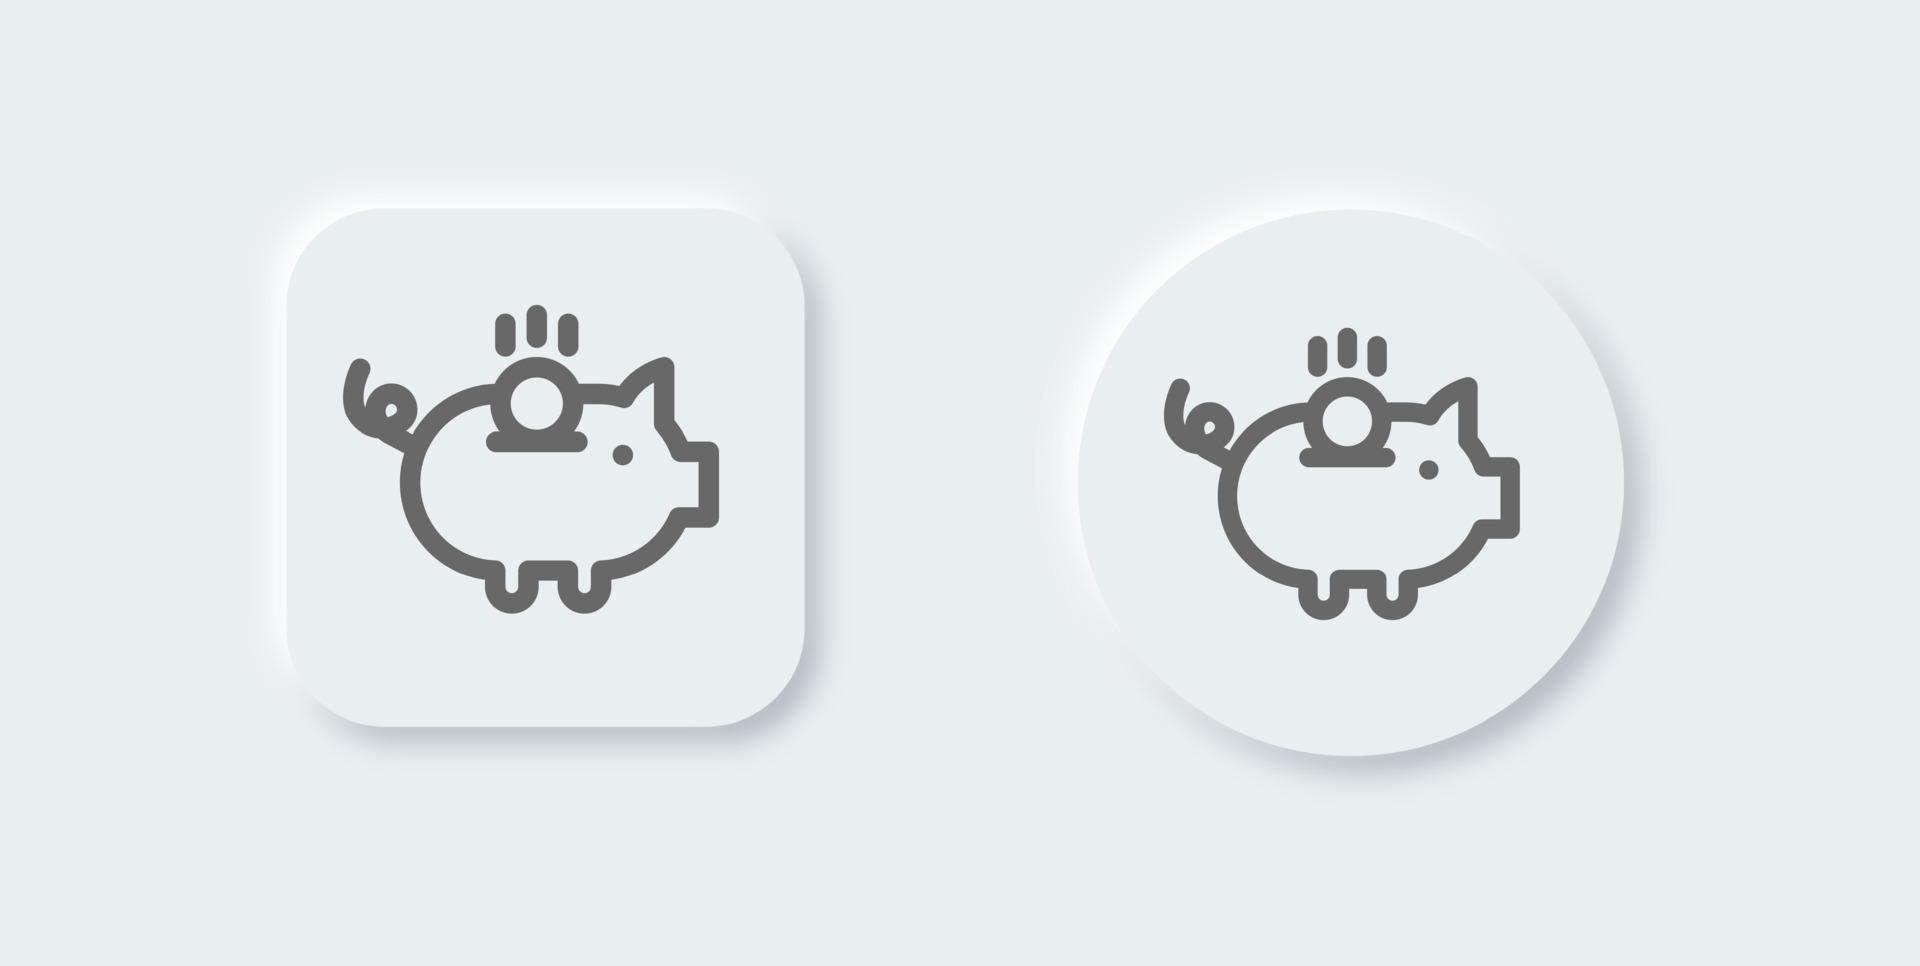 Savings line icon in neomorphic design style. Pig coin signs vector illustration.